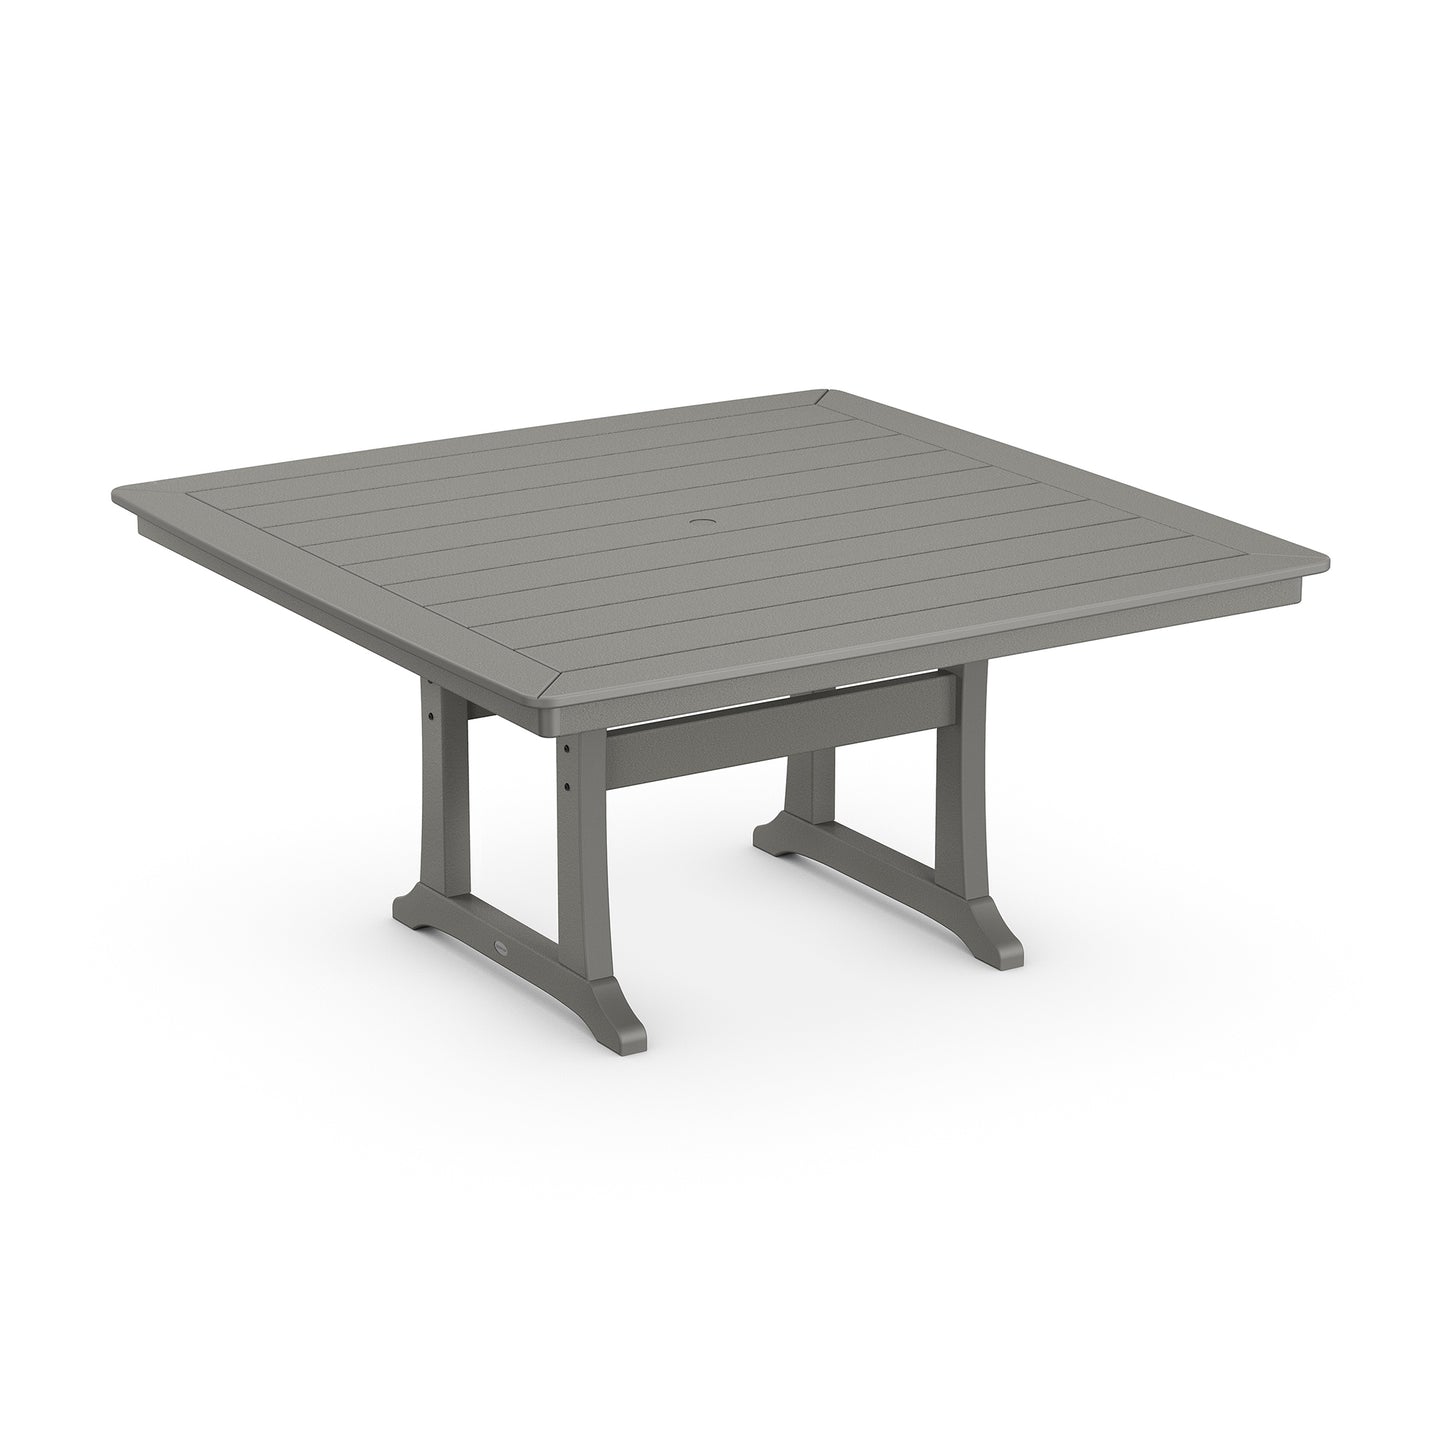 A square, modern POLYWOOD Nautical Trestle 59" Dining Table with a slatted top and sturdy legs, rendered in a neutral gray color. The design is simple and functional, ideal for.